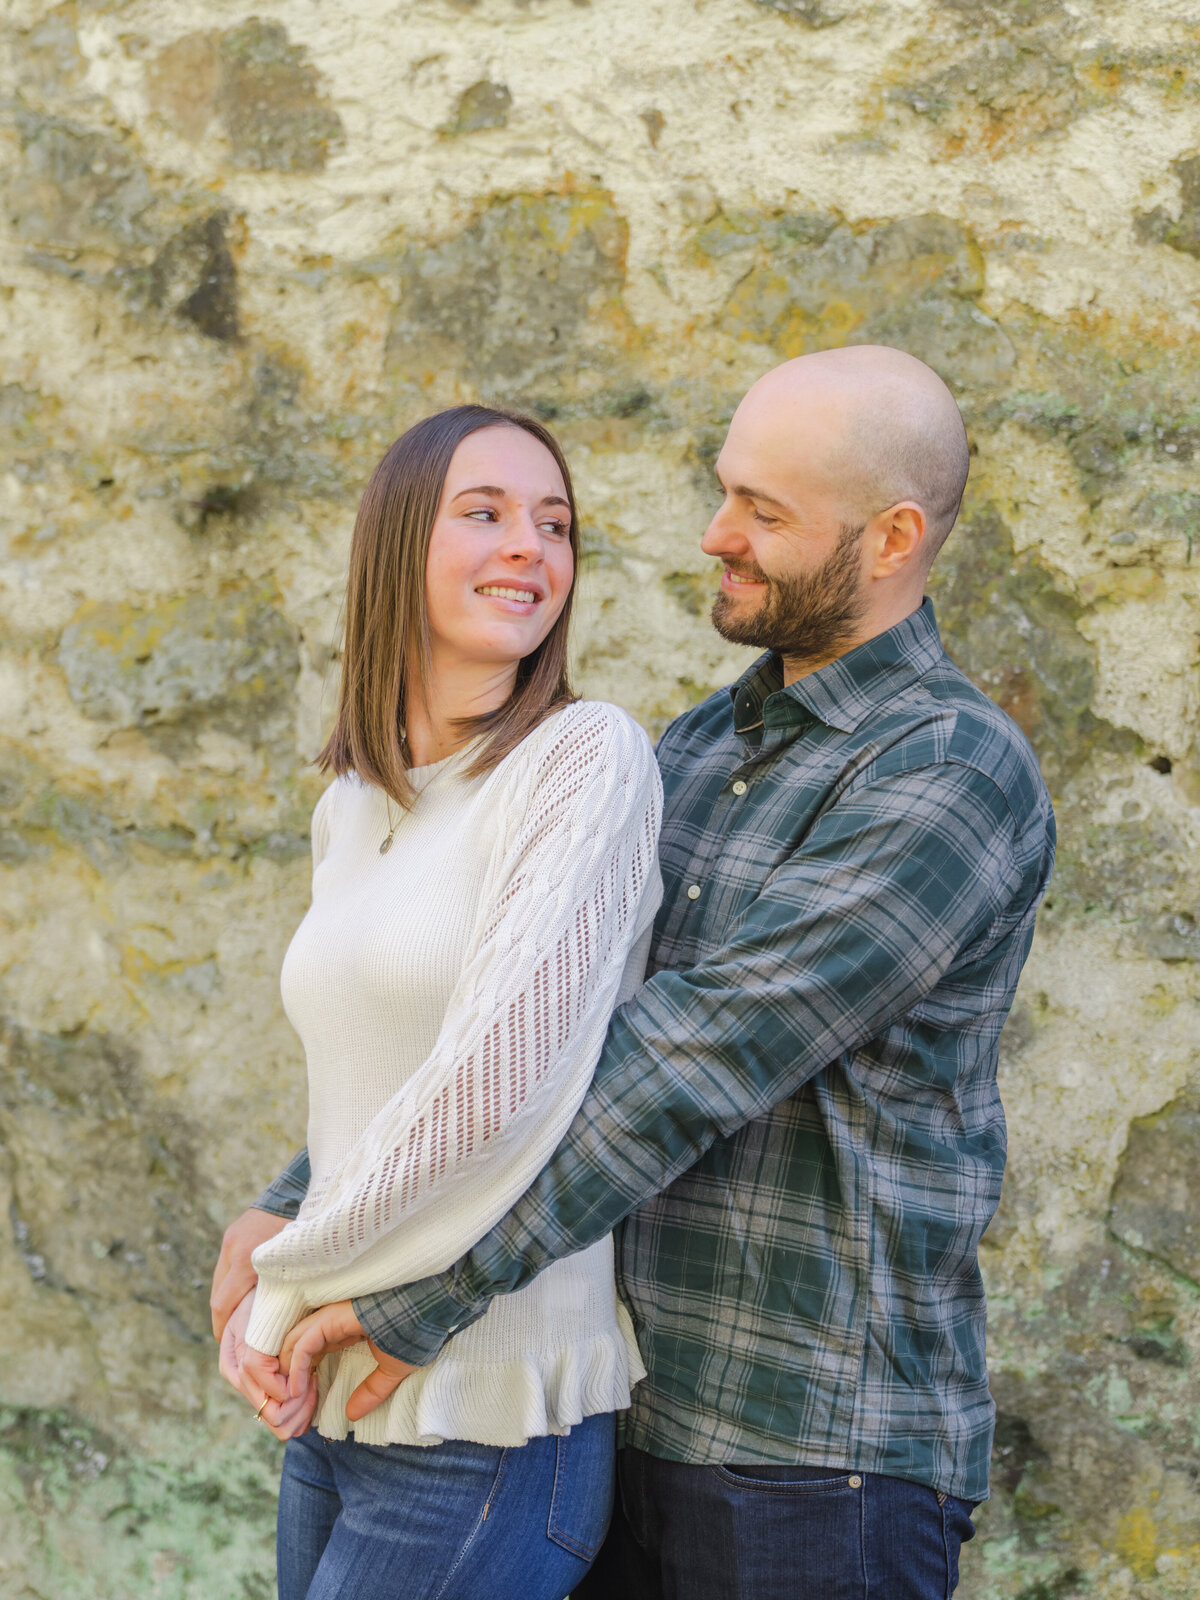 Romantic spring engagement photography in JAck London Park, Napa Valley, California